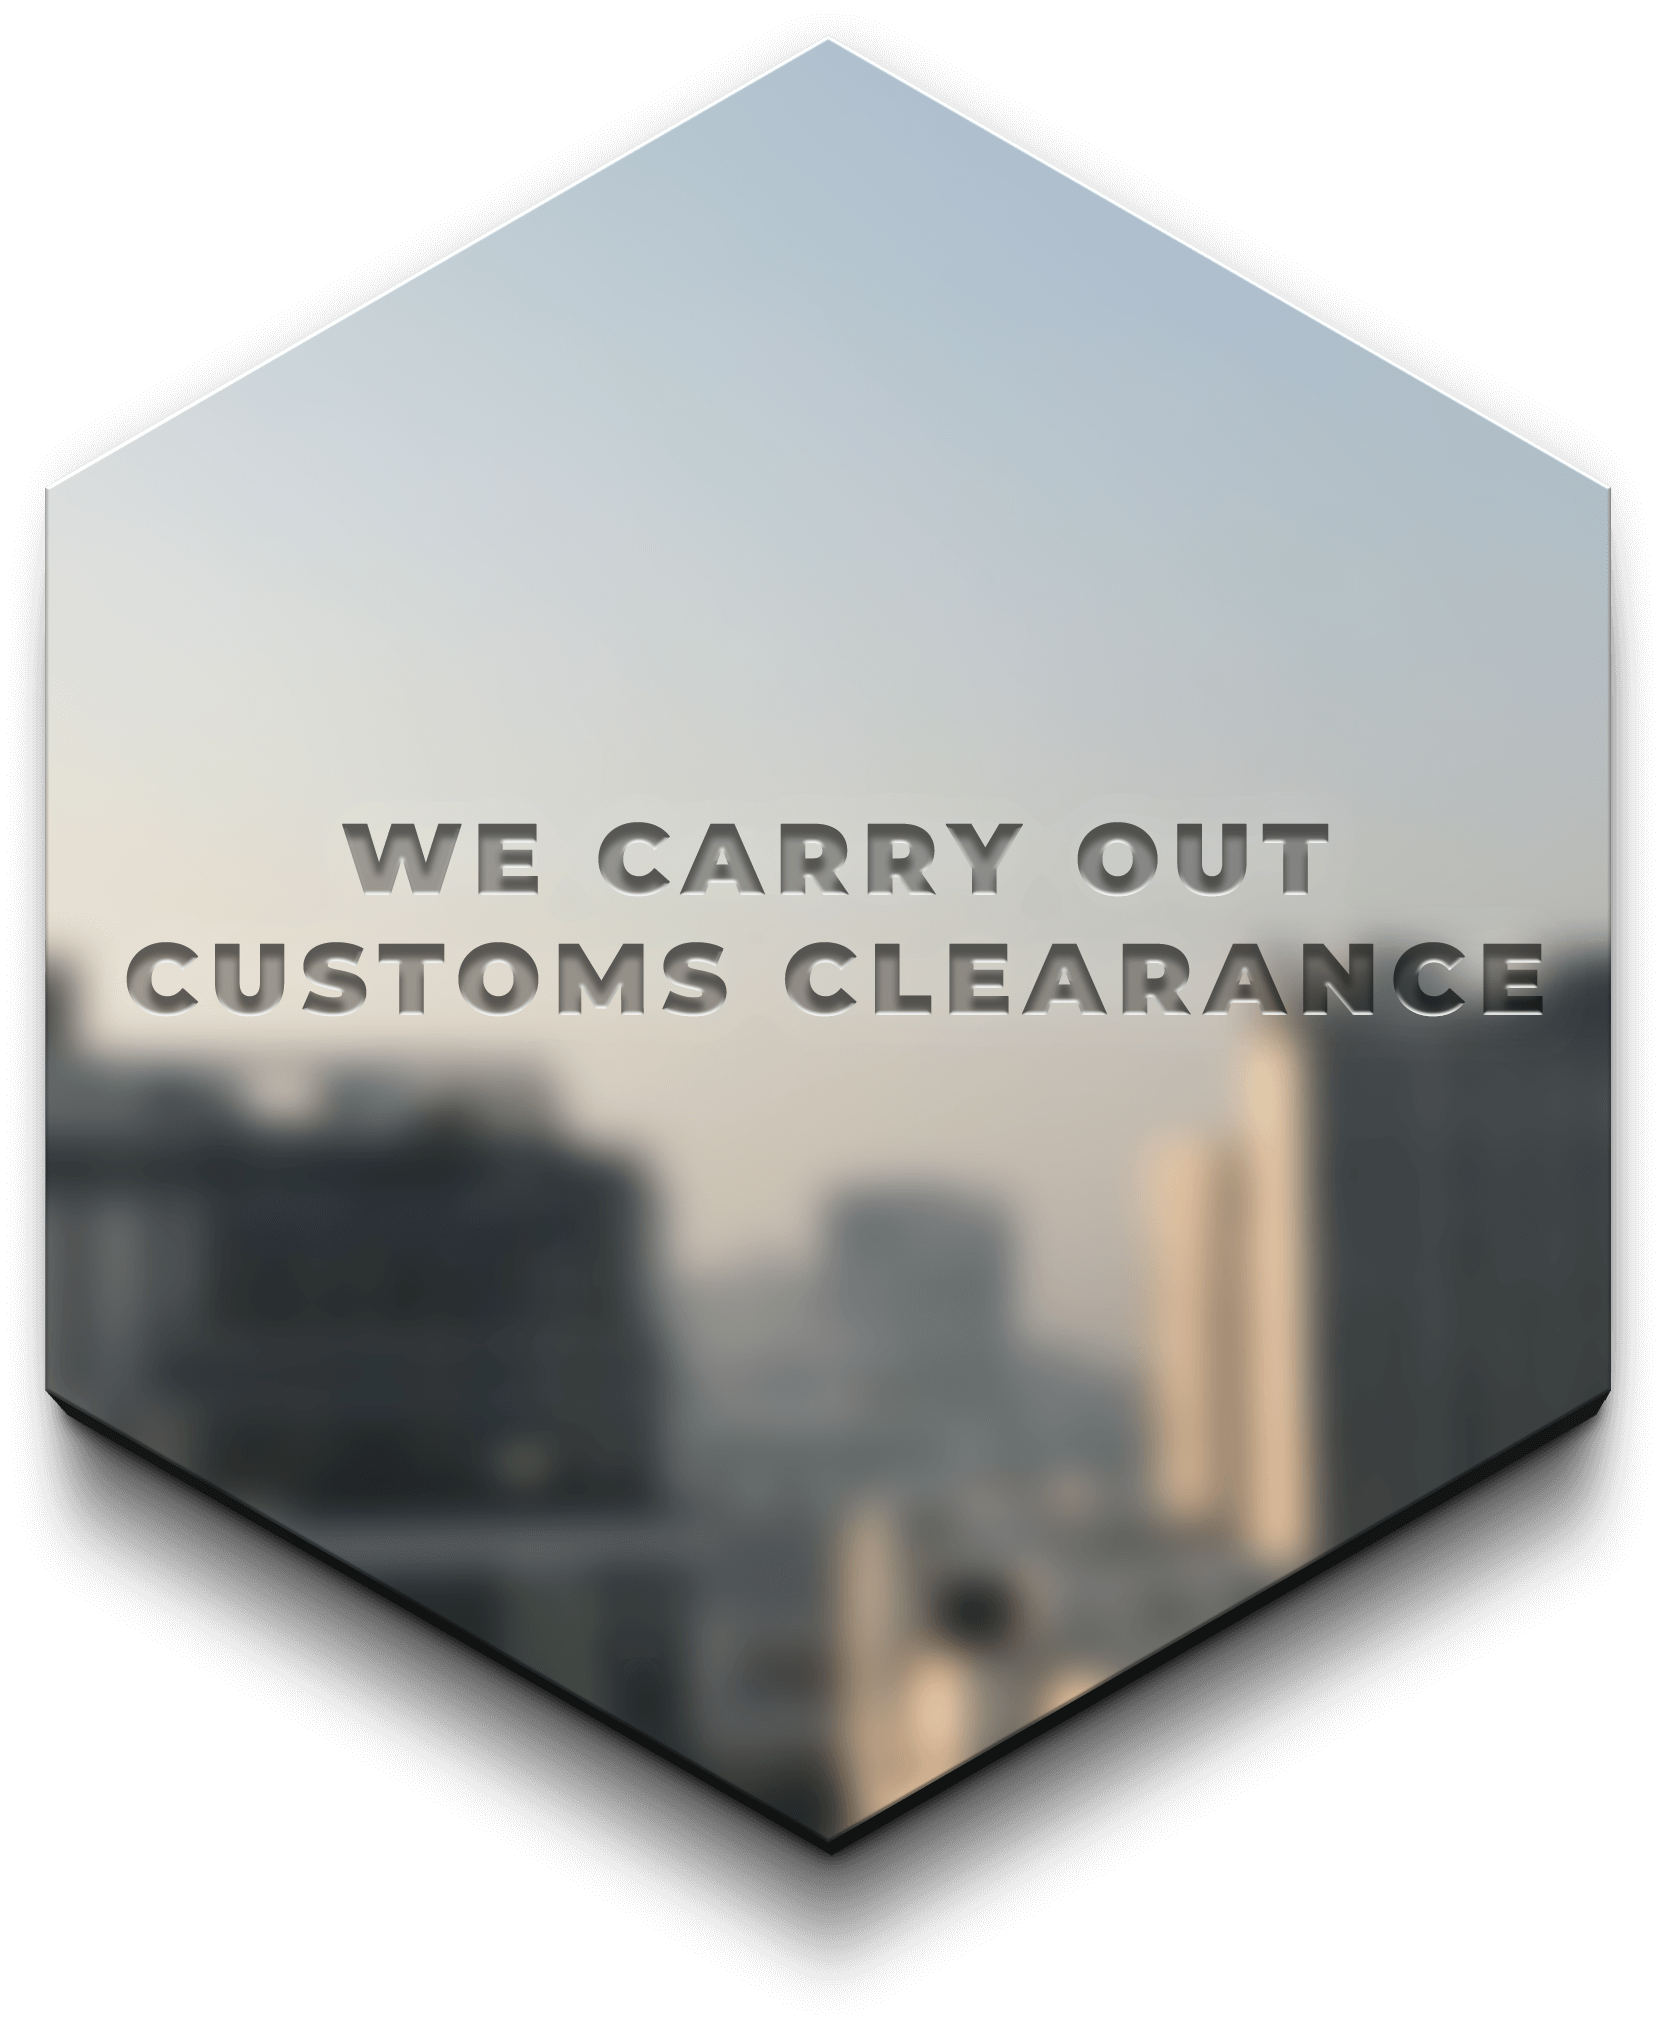 We carry out customs clearance